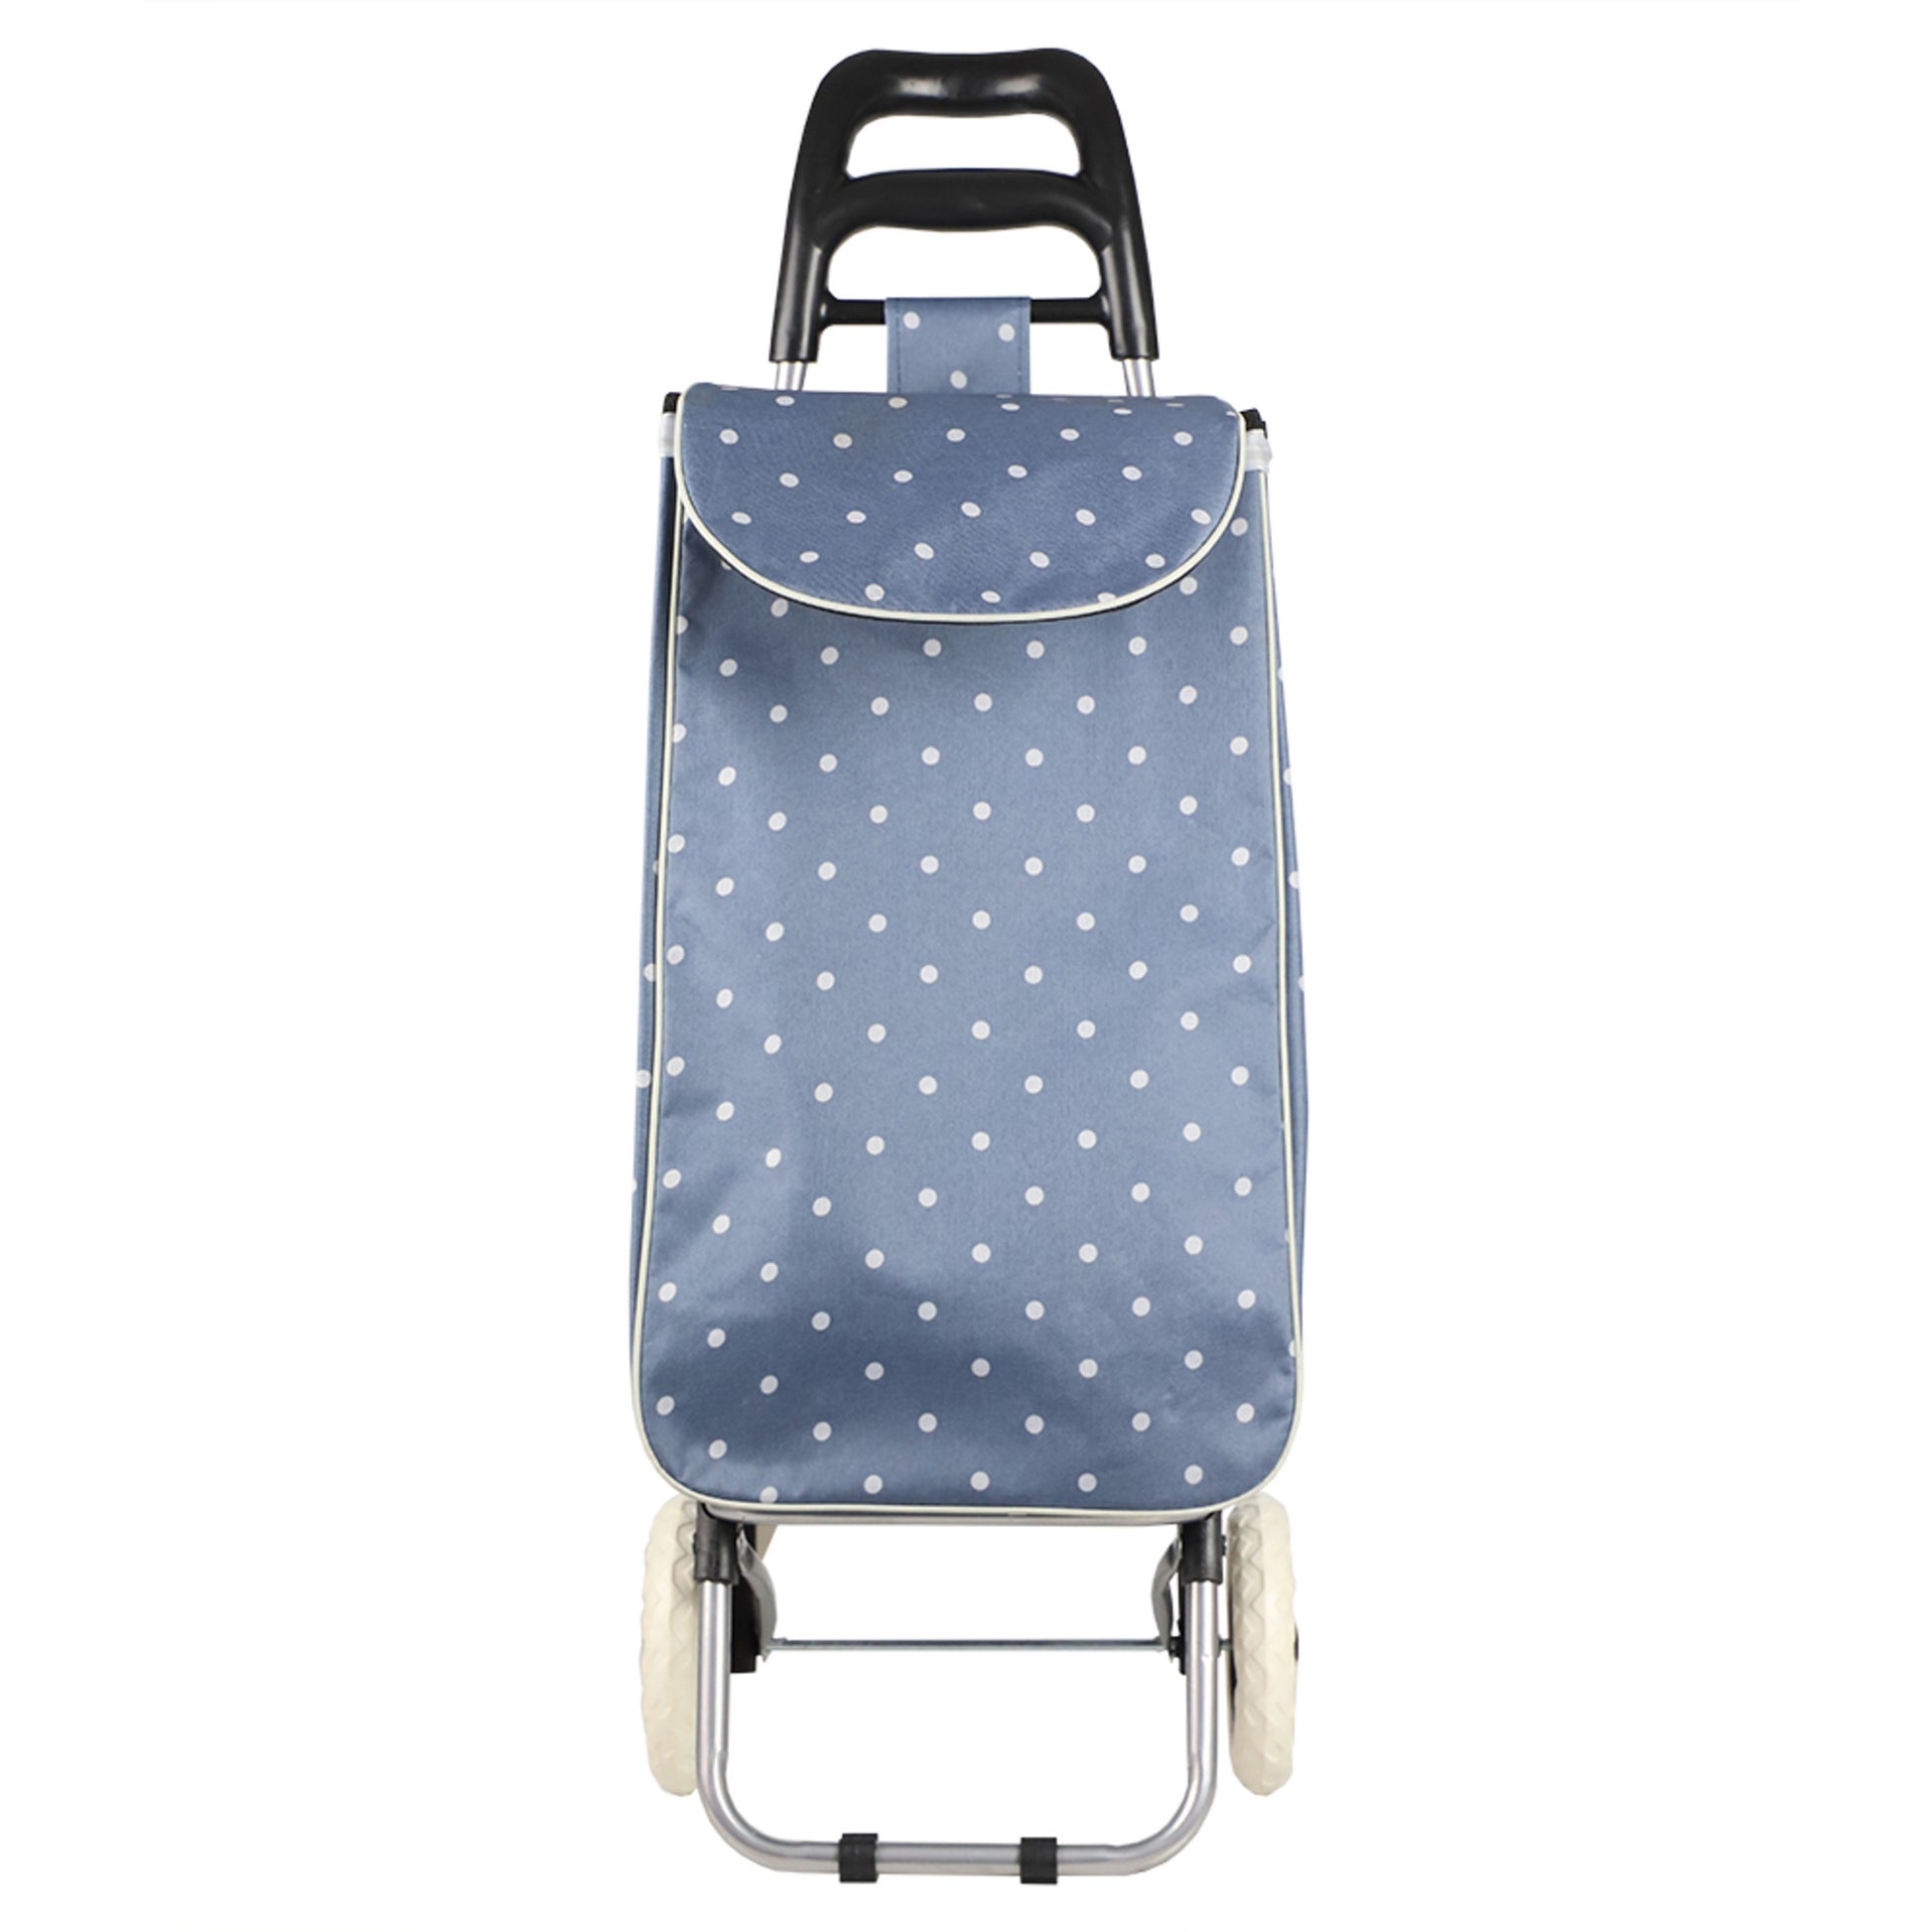 Home Basics Polka Dot Multi-Purpose Rolling Cart With Built-In Chair, Blue - Blue